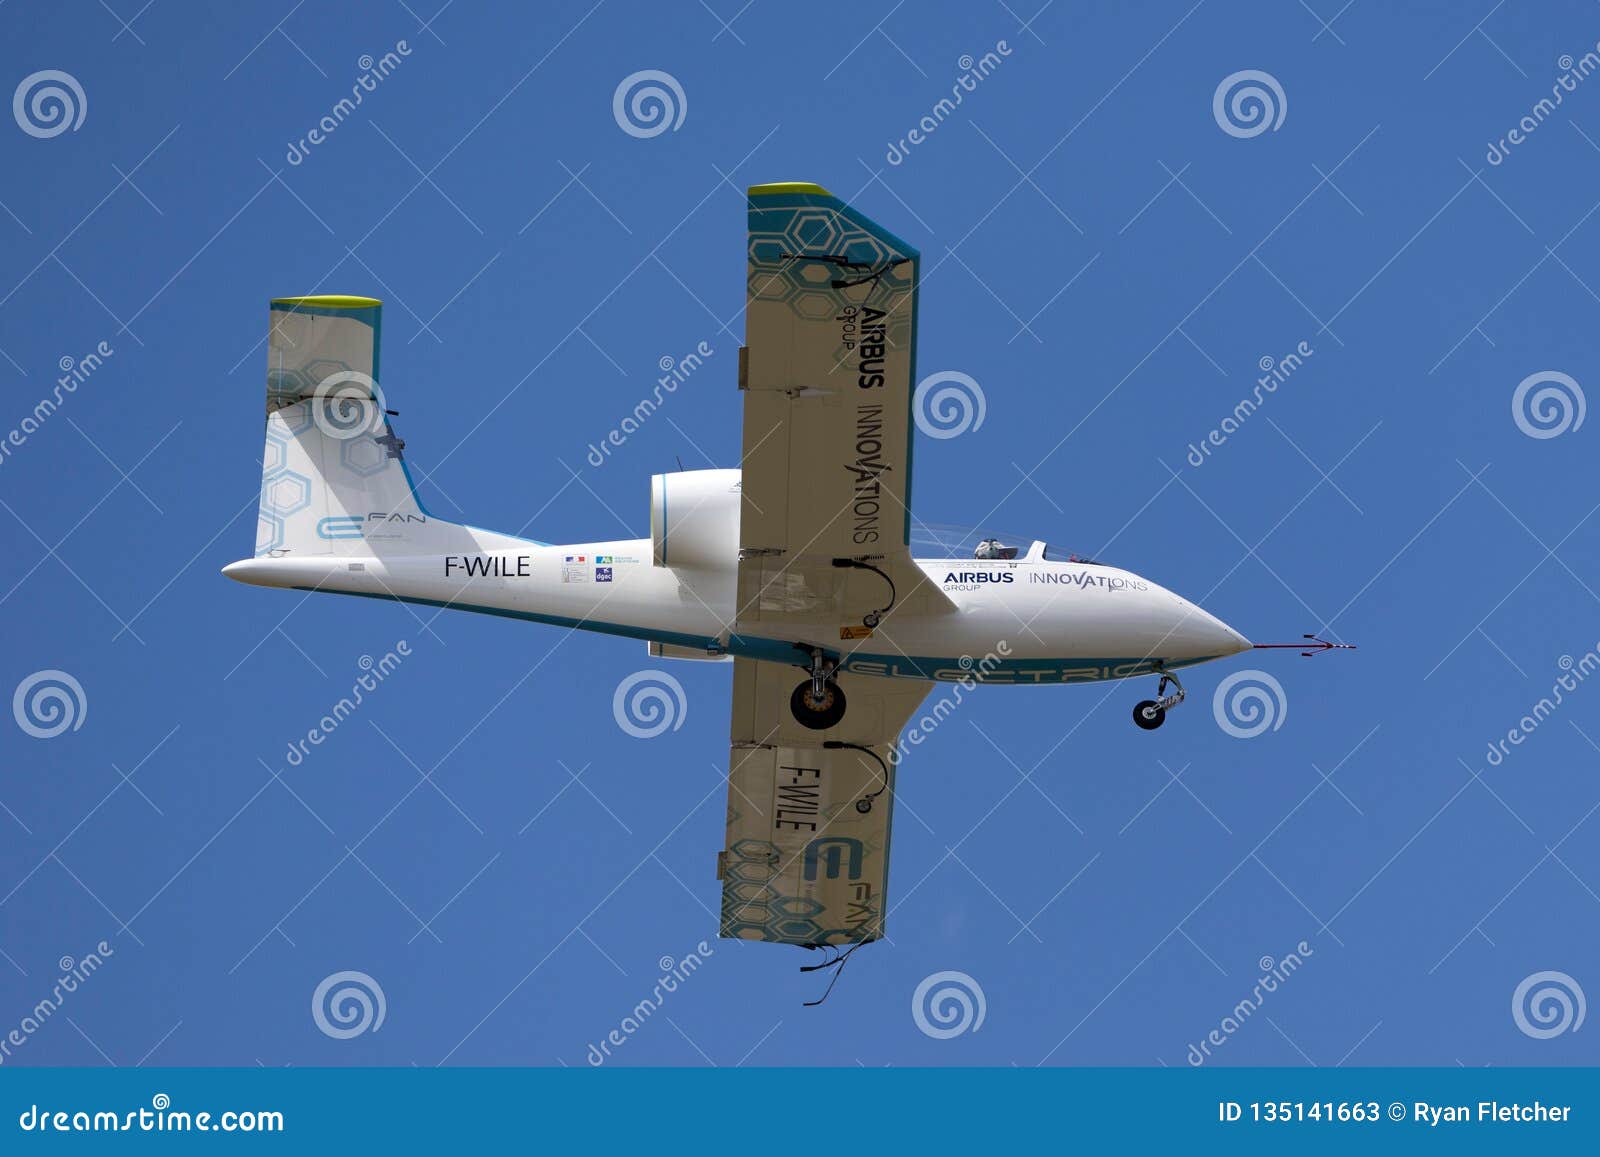 The Airbus E-Fan Is A Prototype Electric Aircraft Being Developed By ...